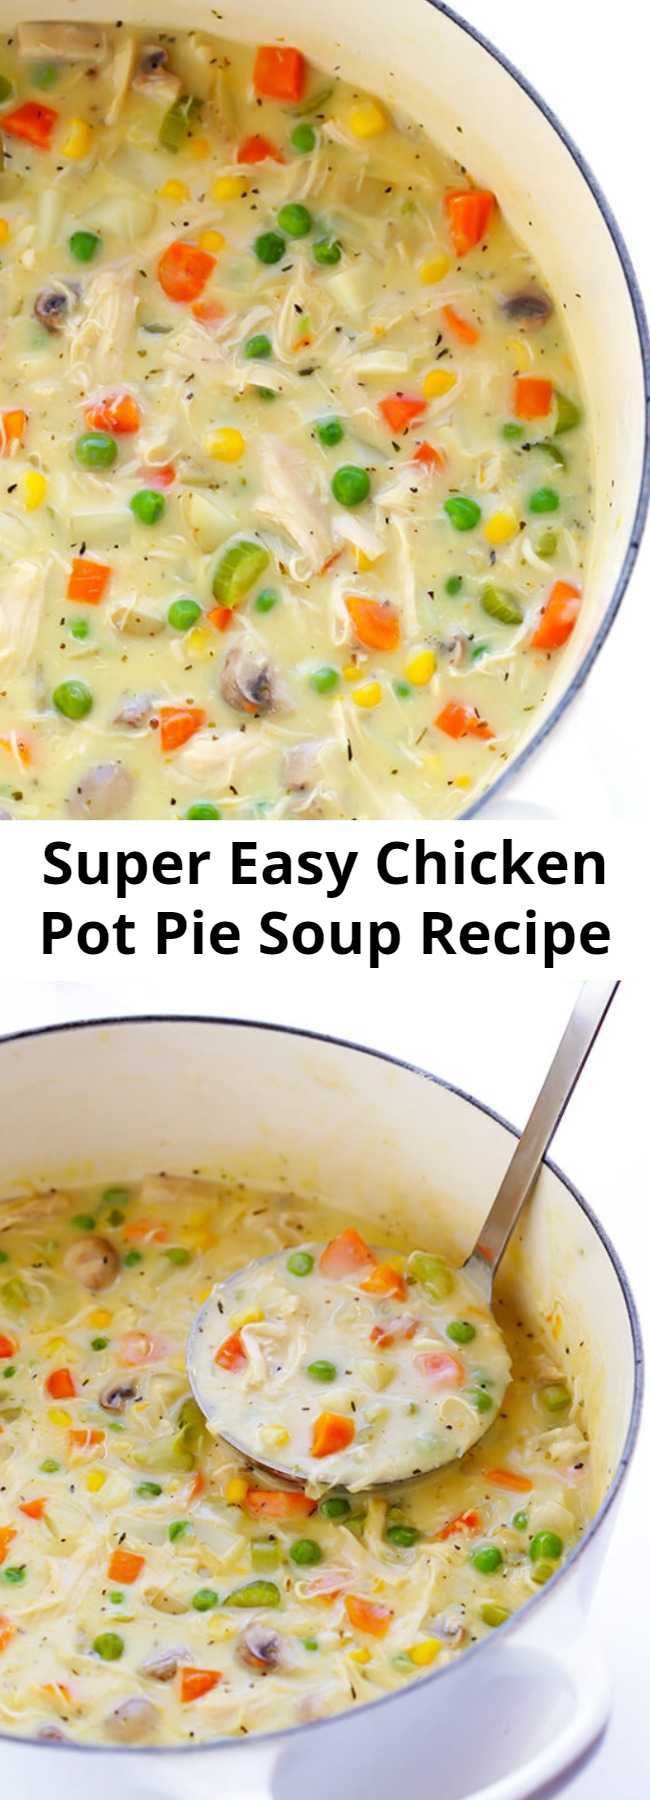 Super Easy Chicken Pot Pie Soup Recipe - This Chicken Pot Pie Soup recipe is simple to make, lightened up with a few easy tweaks, and deliciously rich and creamy.